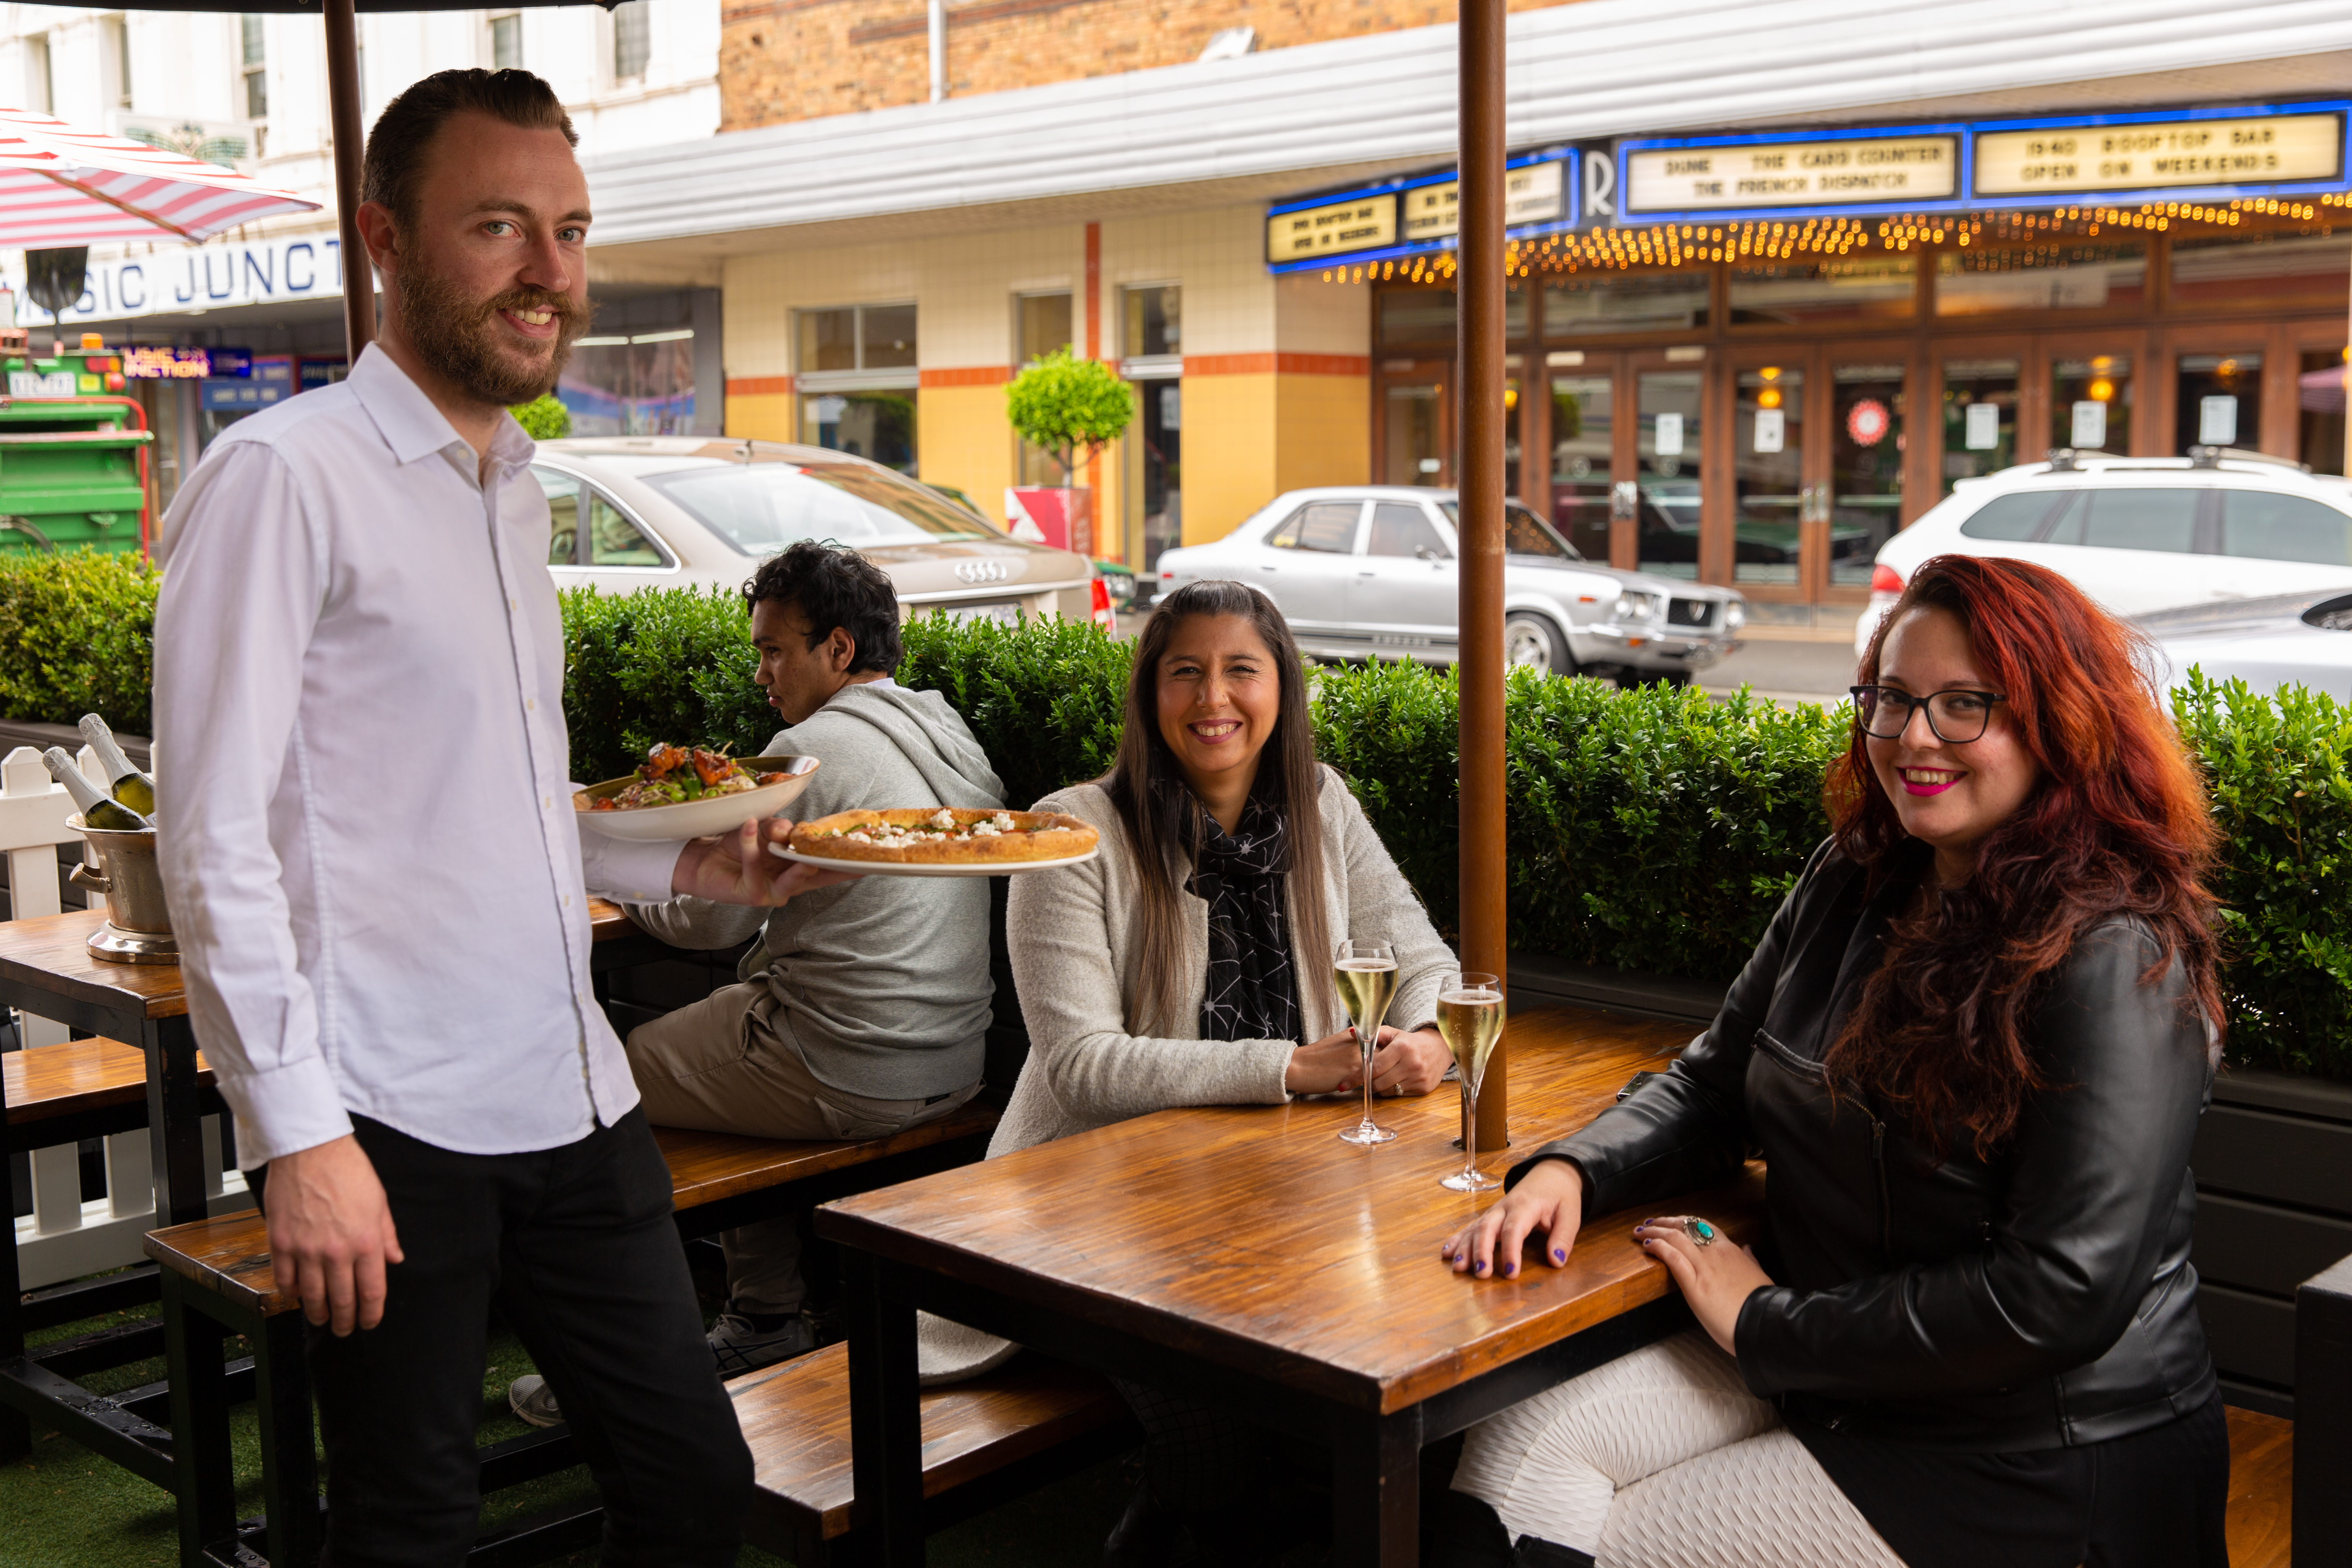 Three people around a table that is on the side of the road in a parklet area bordered by plants between them and the road